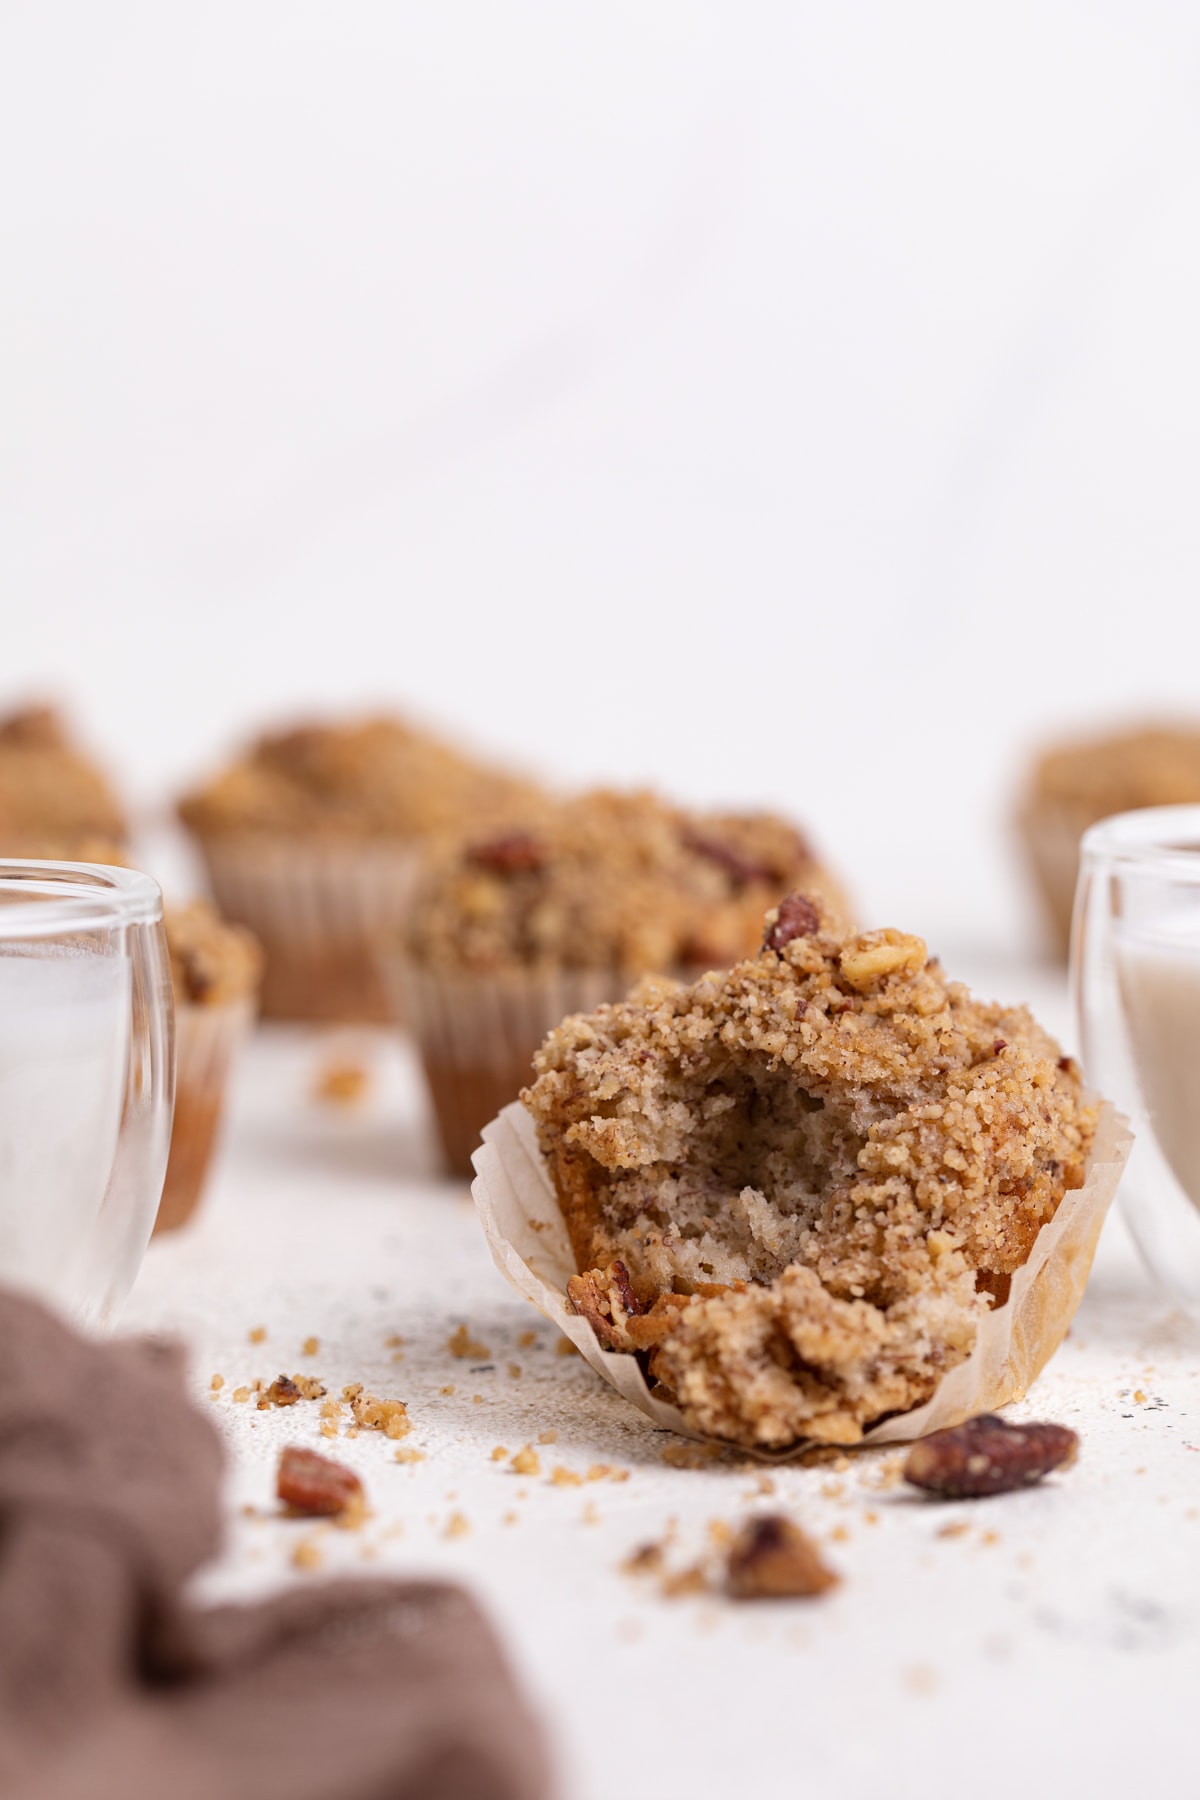 Vegan Banana Muffins with cinnamon streusel with a bite removed